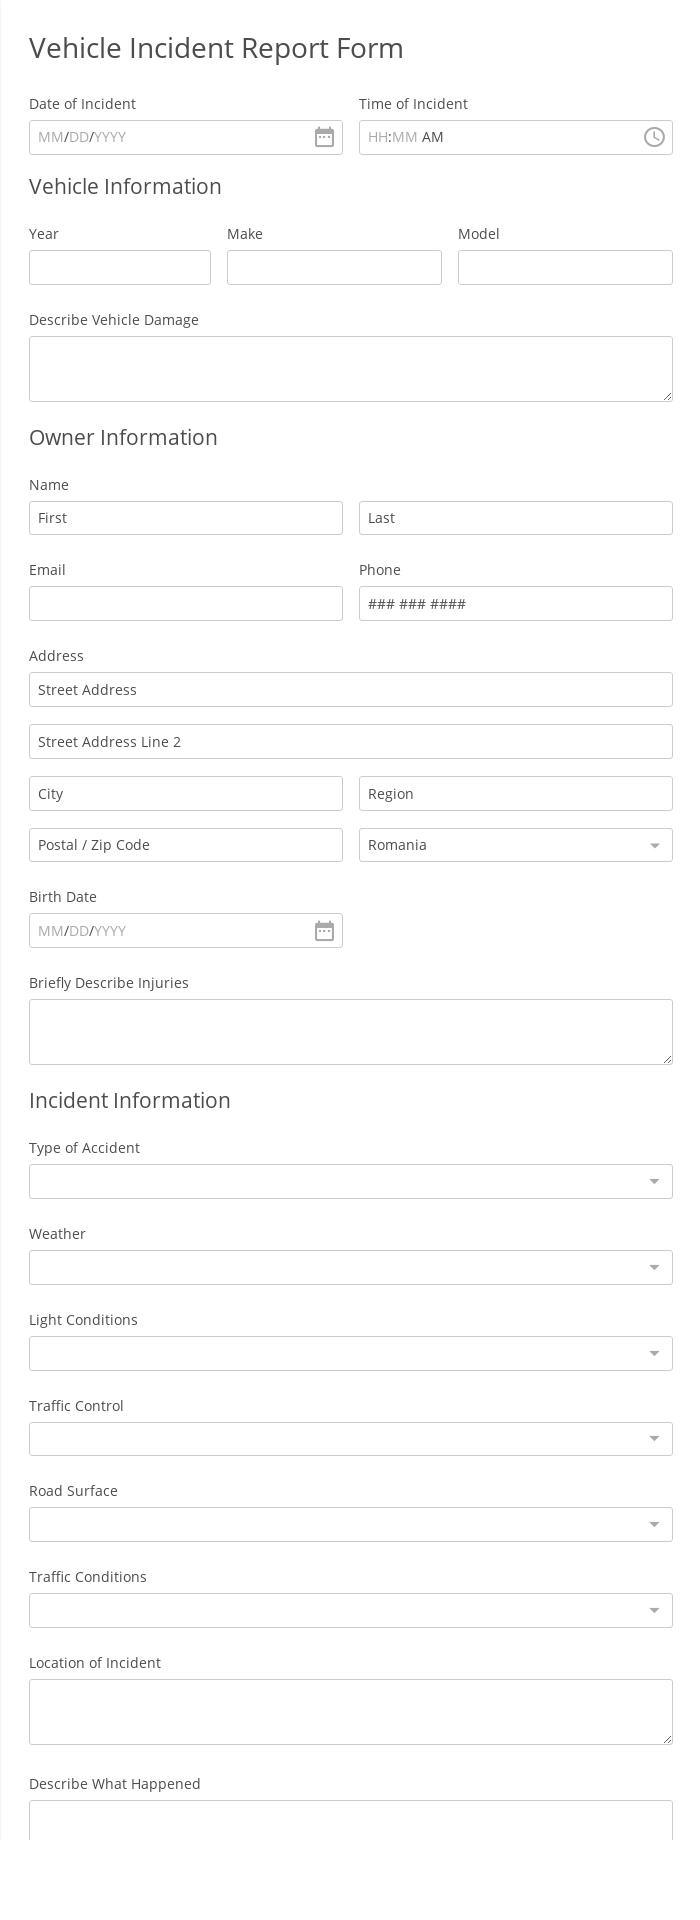 Vehicle Incident Report Form Template  23 Form Builder Pertaining To Vehicle Accident Report Template